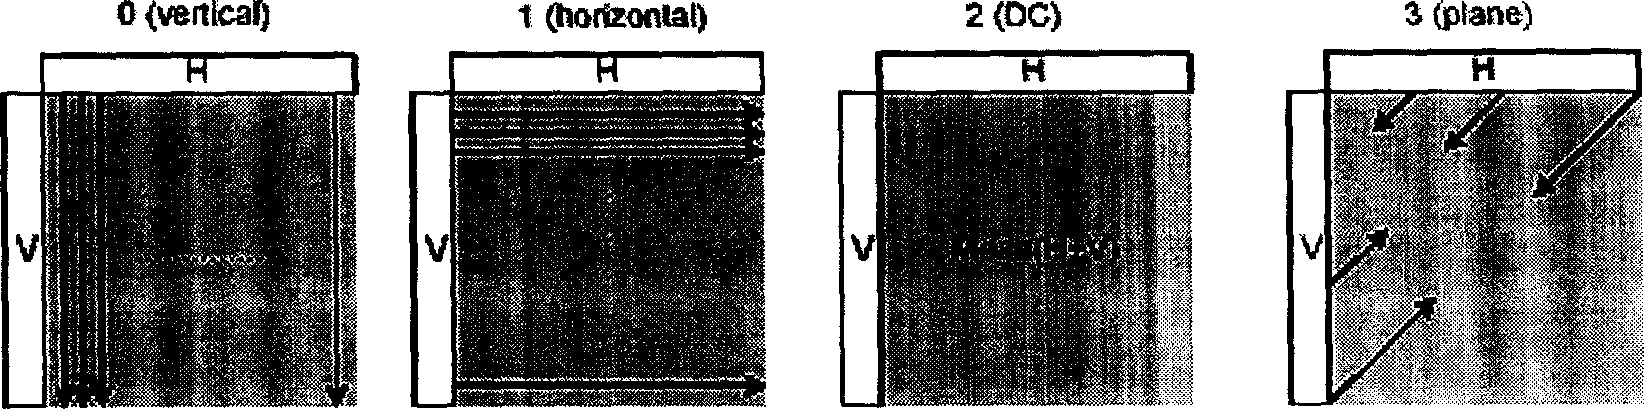 Method for enhancing intra-layer and frame prediction